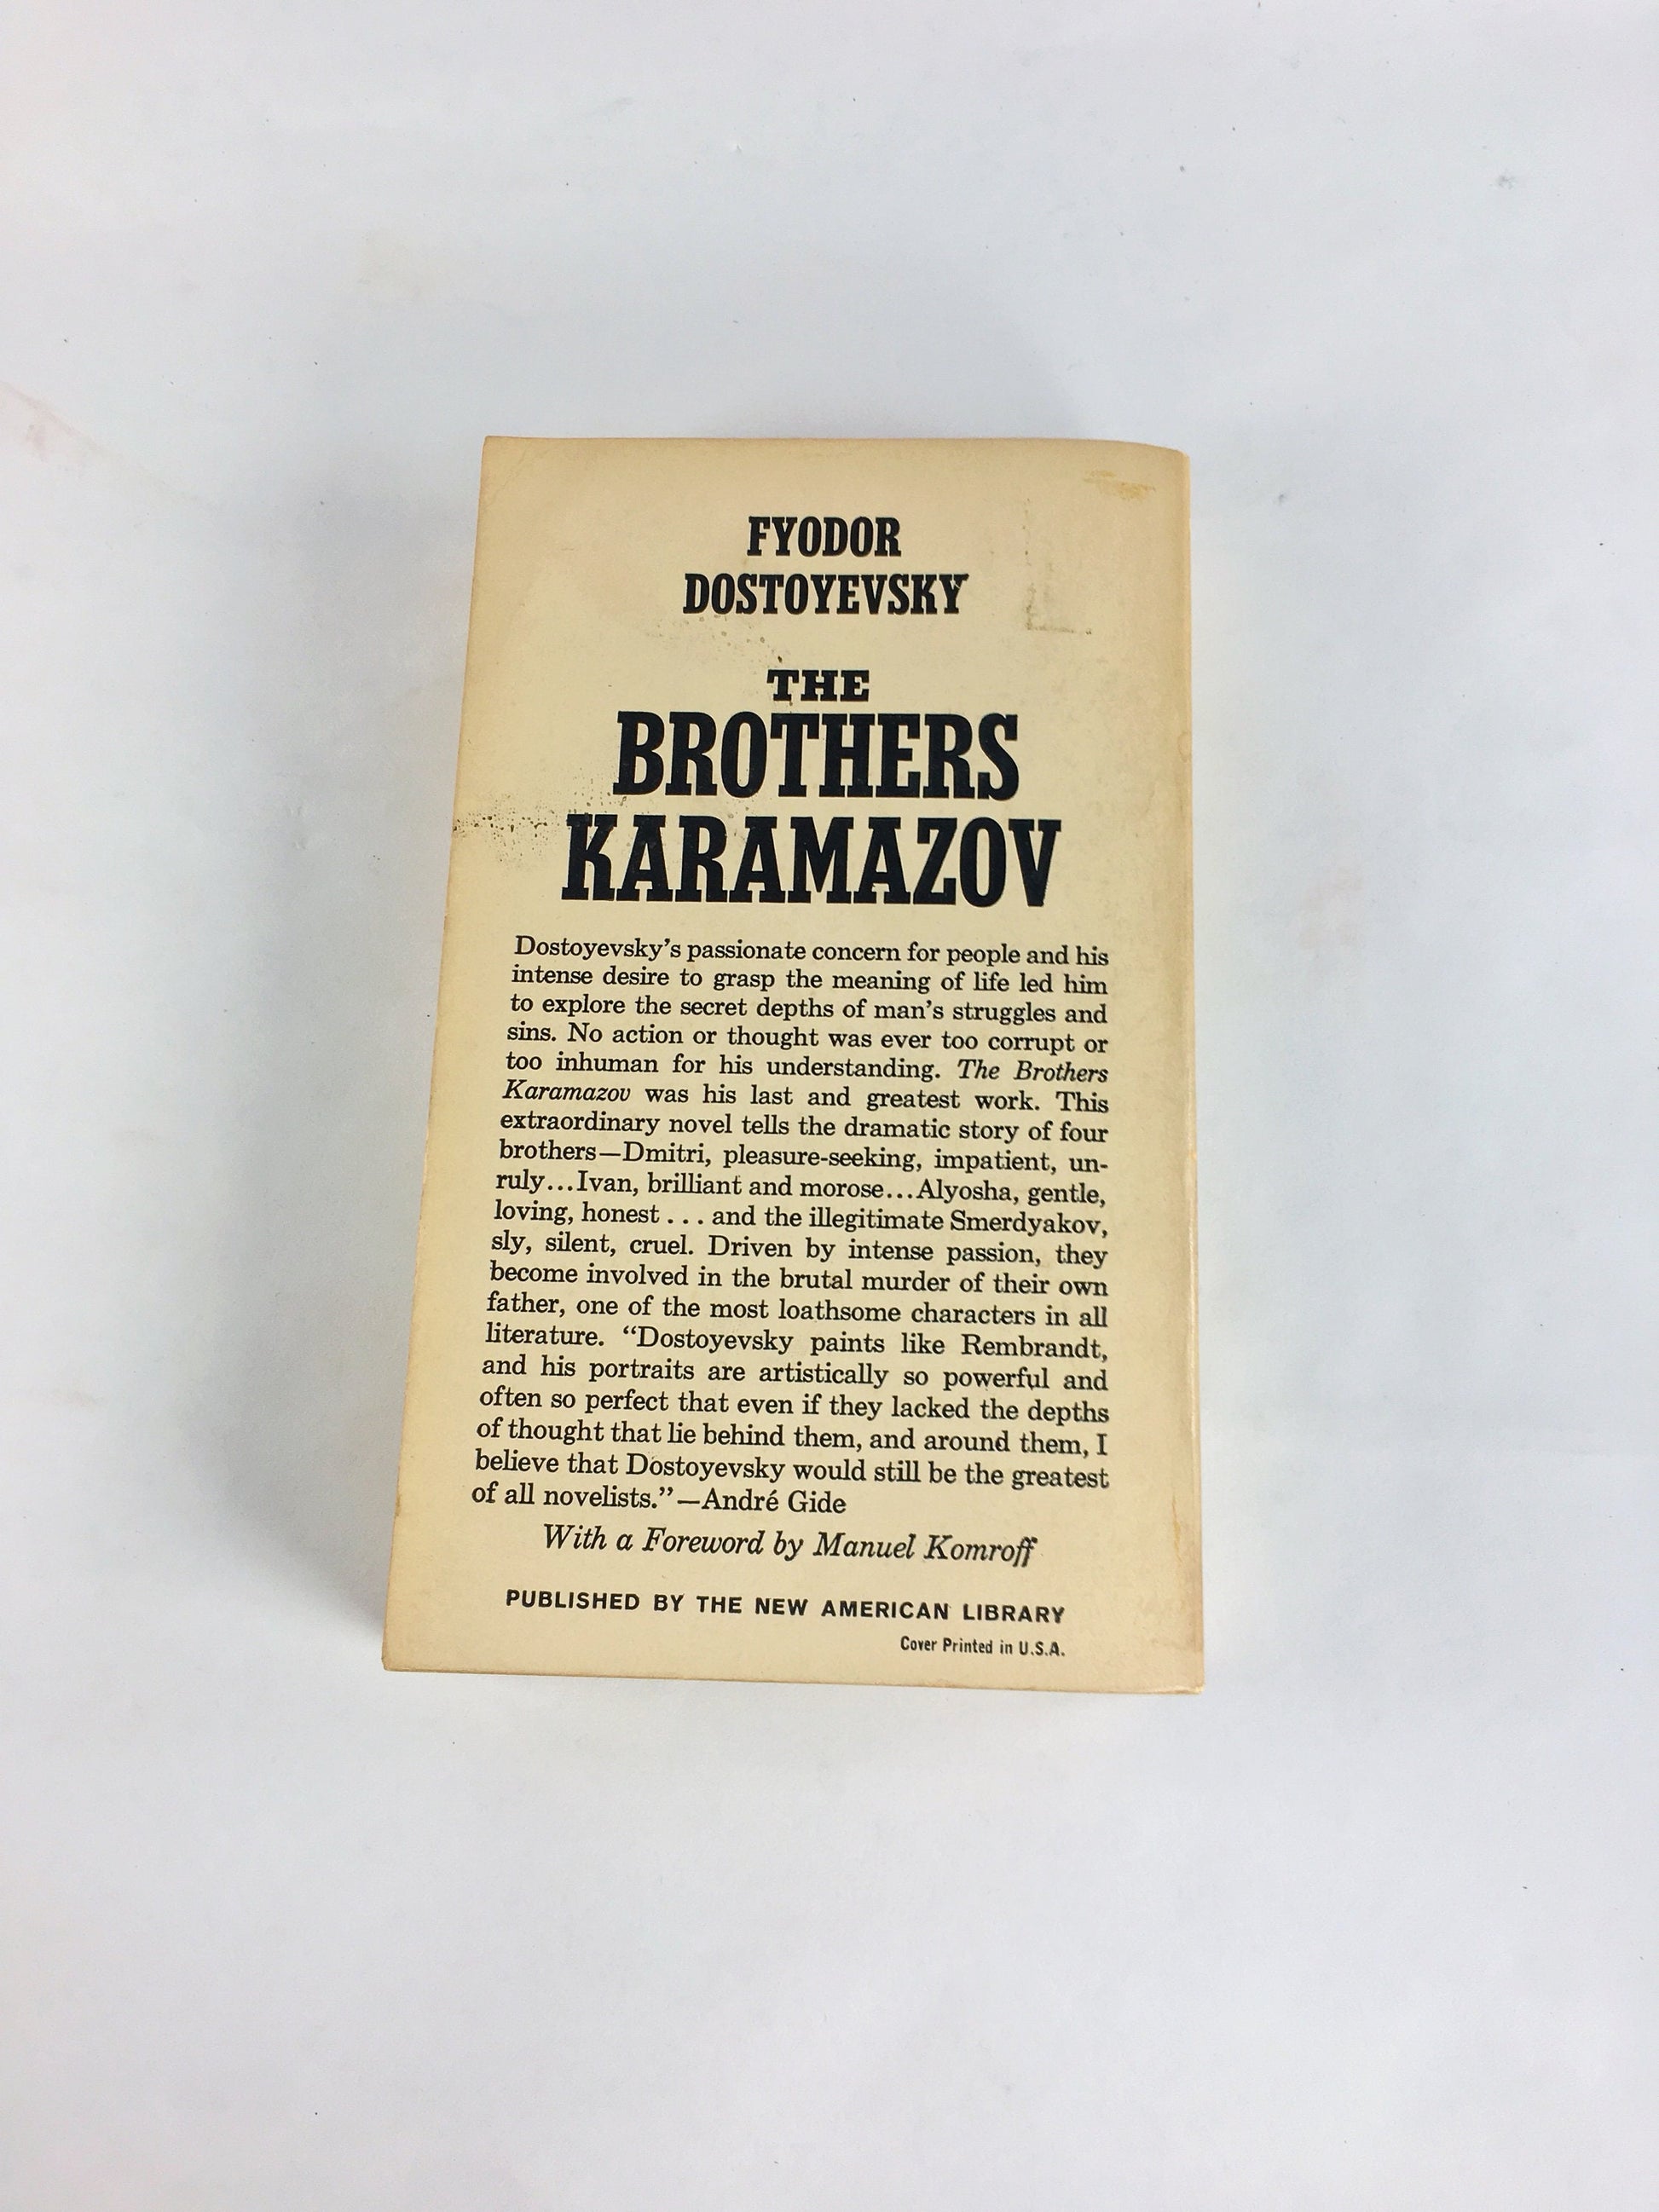 Brothers Karamazov by Fyodor Dostoevsky. Vintage paperback book circa 1964. Examines ethics of God and free will. Signet Classic